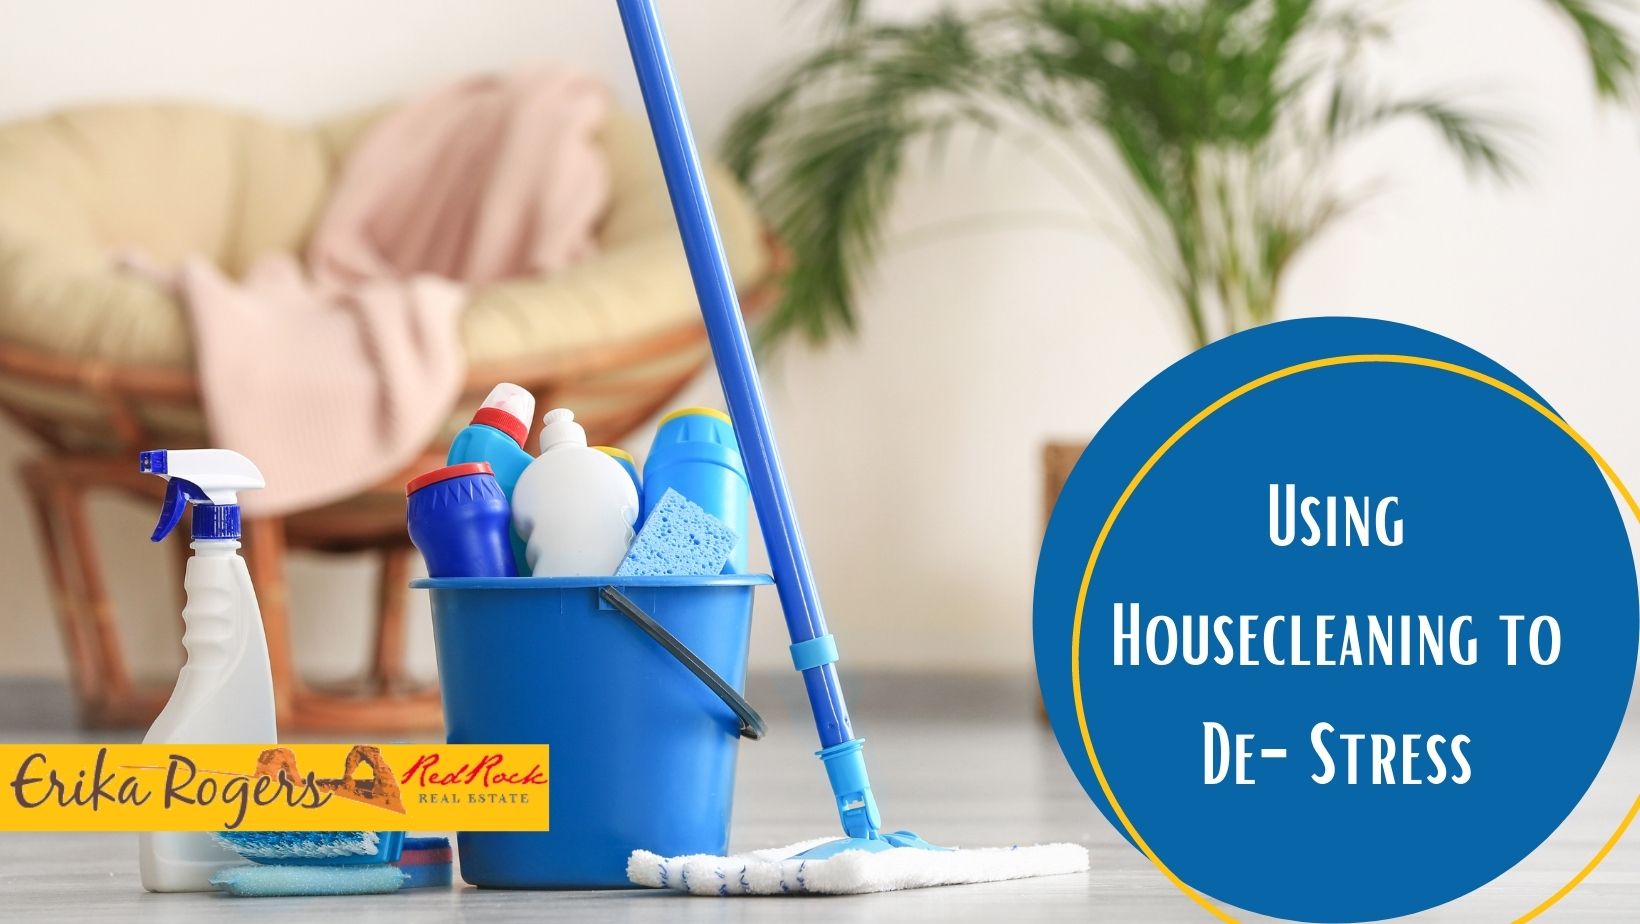 Using Housecleaning to De-Stress